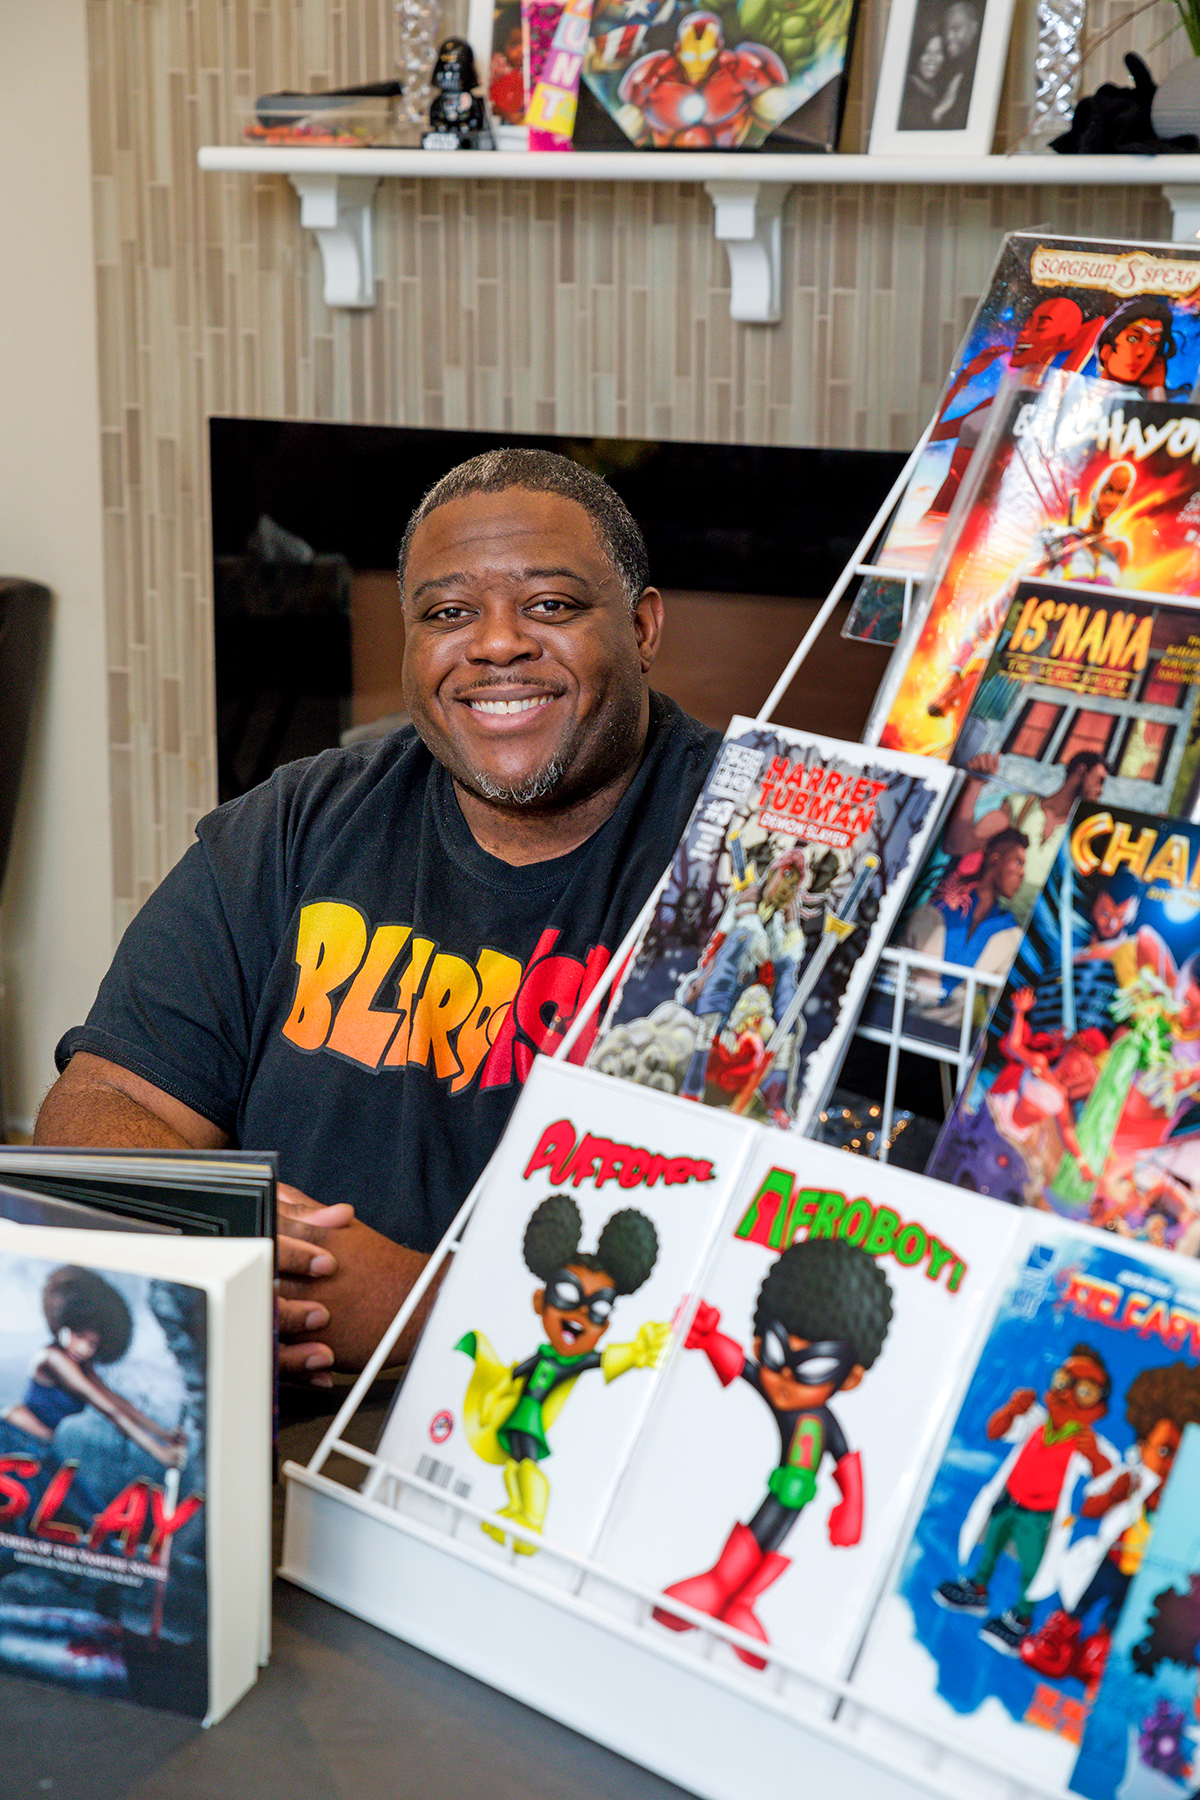 Keith Cooper of Blerdish Sits in front of a fireplace with a display of comic books to his left.